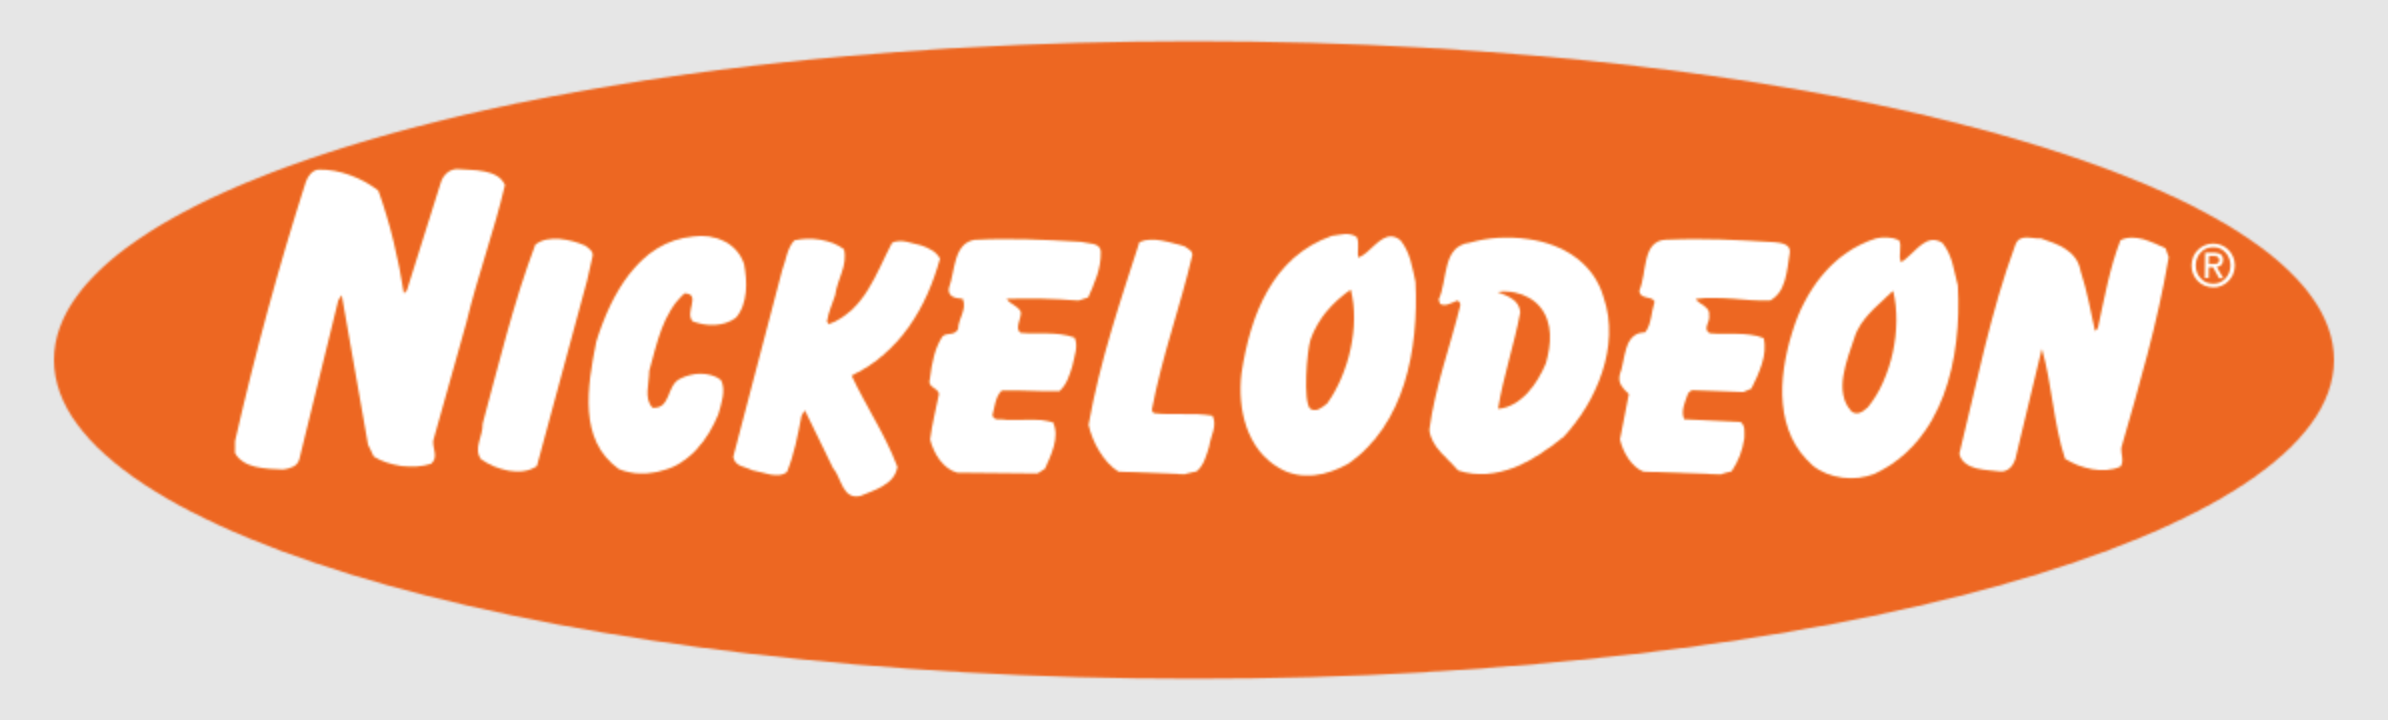 The Complete History of The Nickelodeon Logo